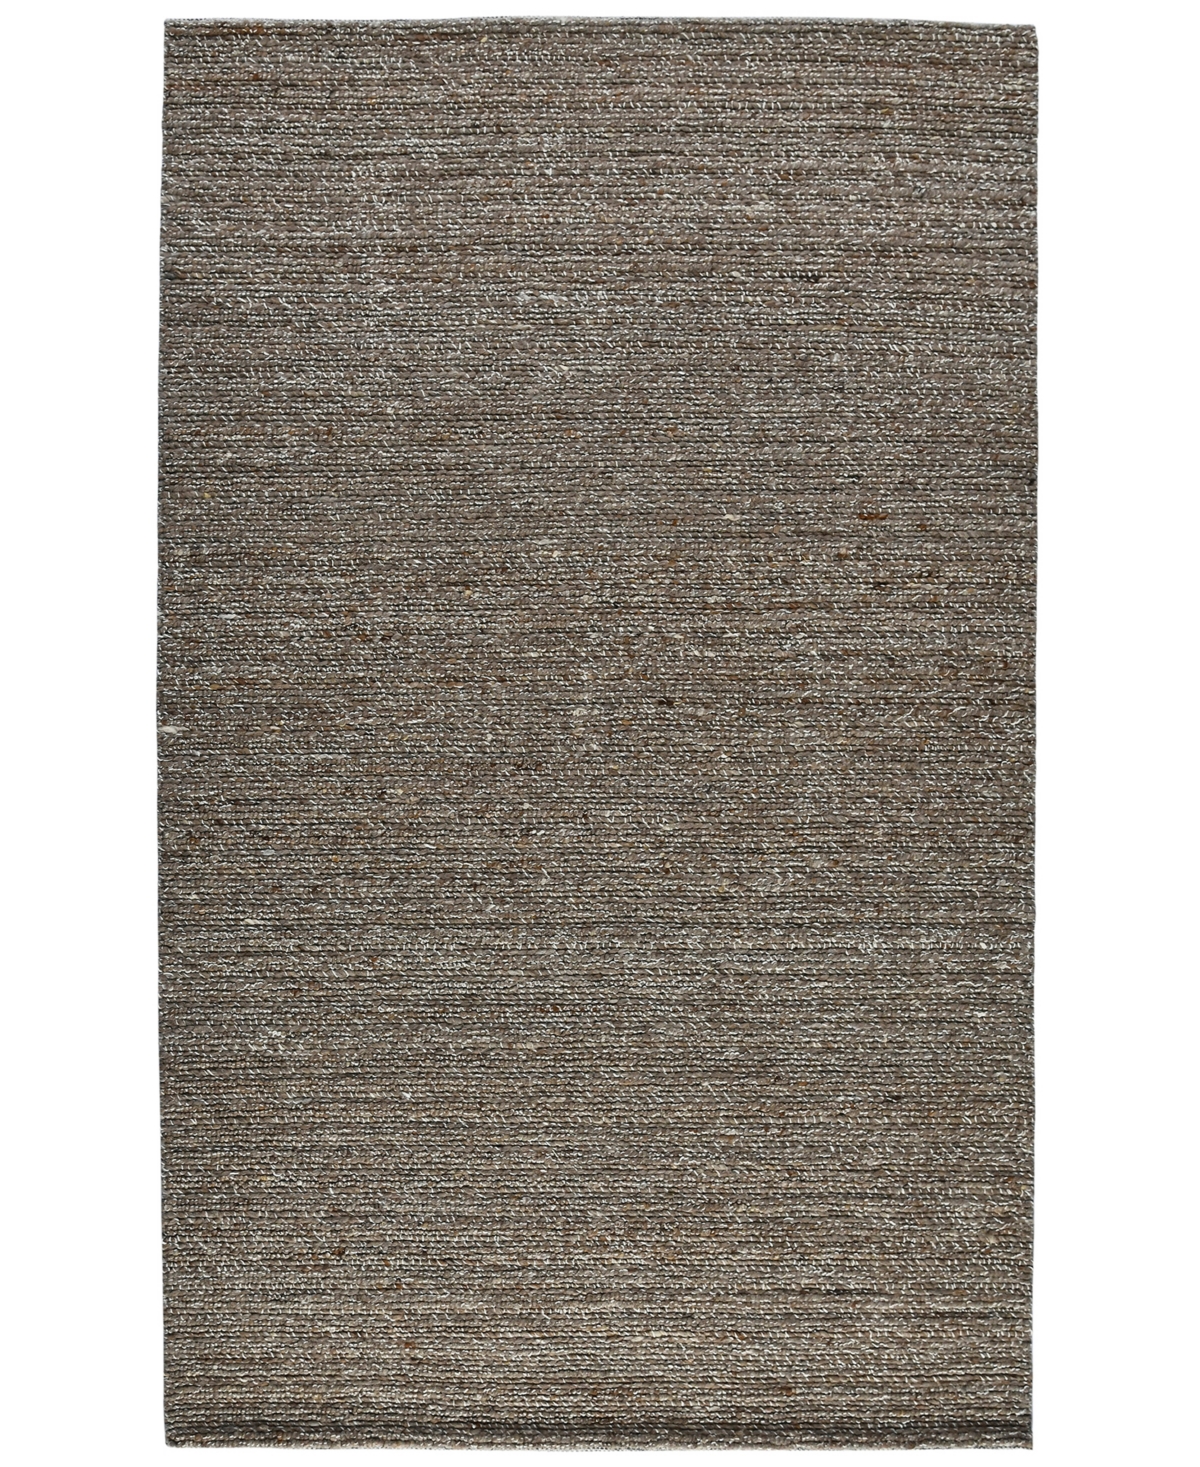 Amer Rugs Norwood Nor4 7'9" X 9'9" Area Rug In Camel